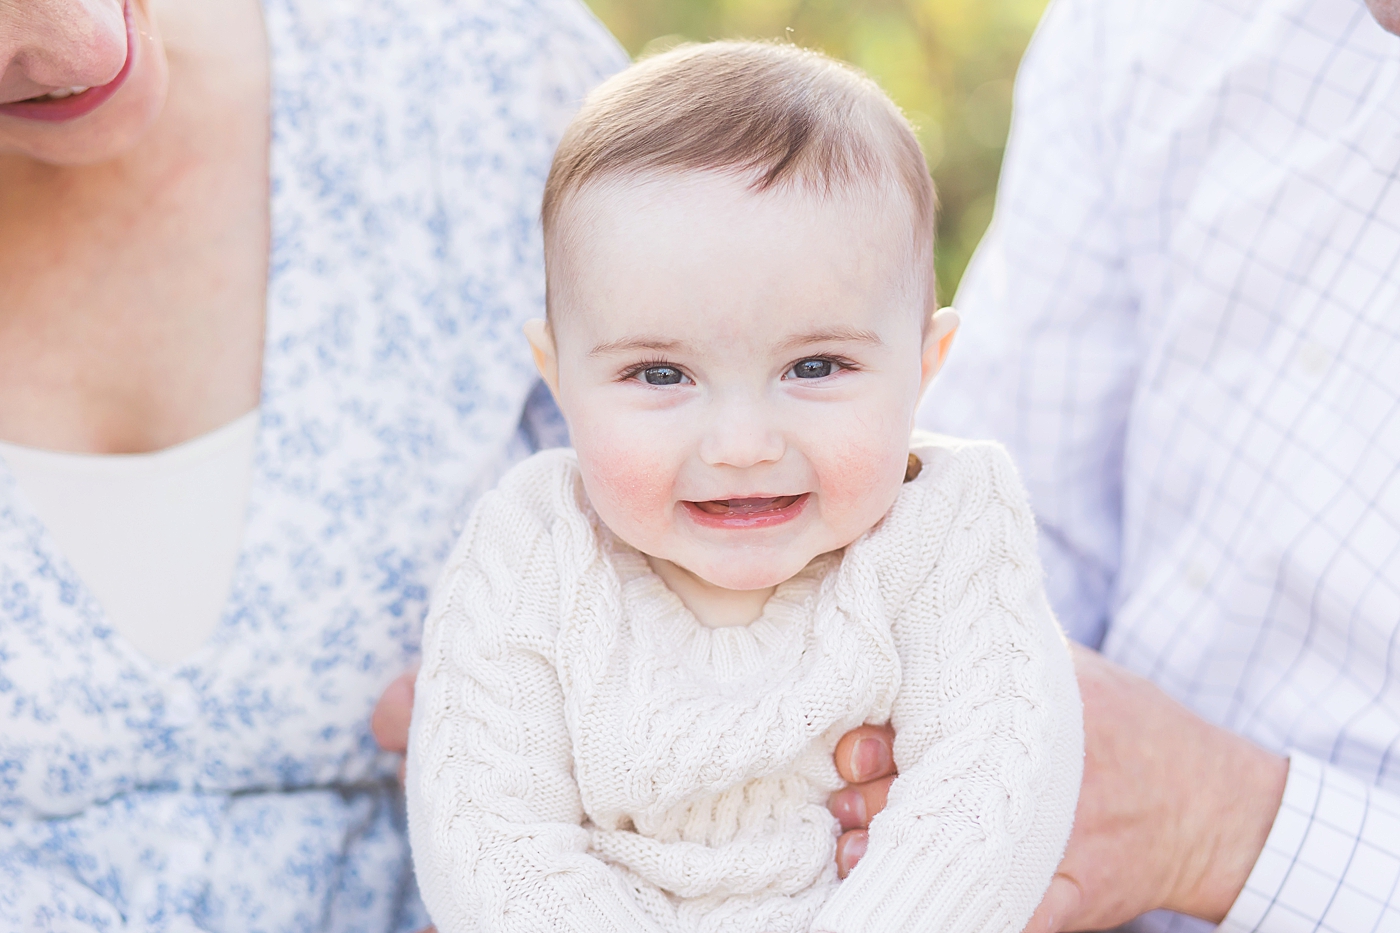 Six-month old baby boy smiling for family portraits. Photo by Fresh Light Photography.